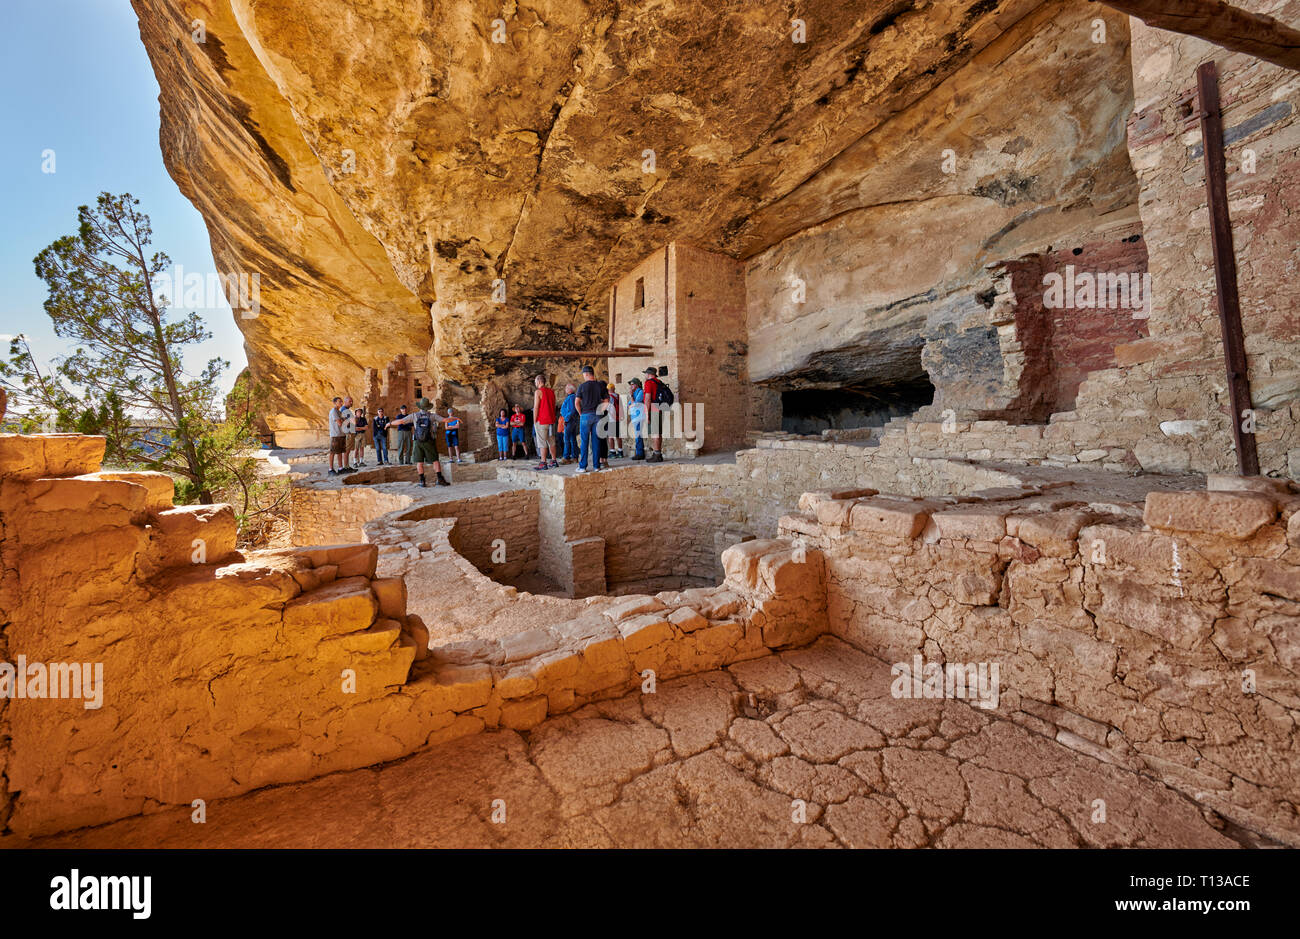 tourists in Balcony House, Cliff dwellings in Mesa-Verde-National Park, UNESCO world heritage site, Colorado, USA, North America Stock Photo